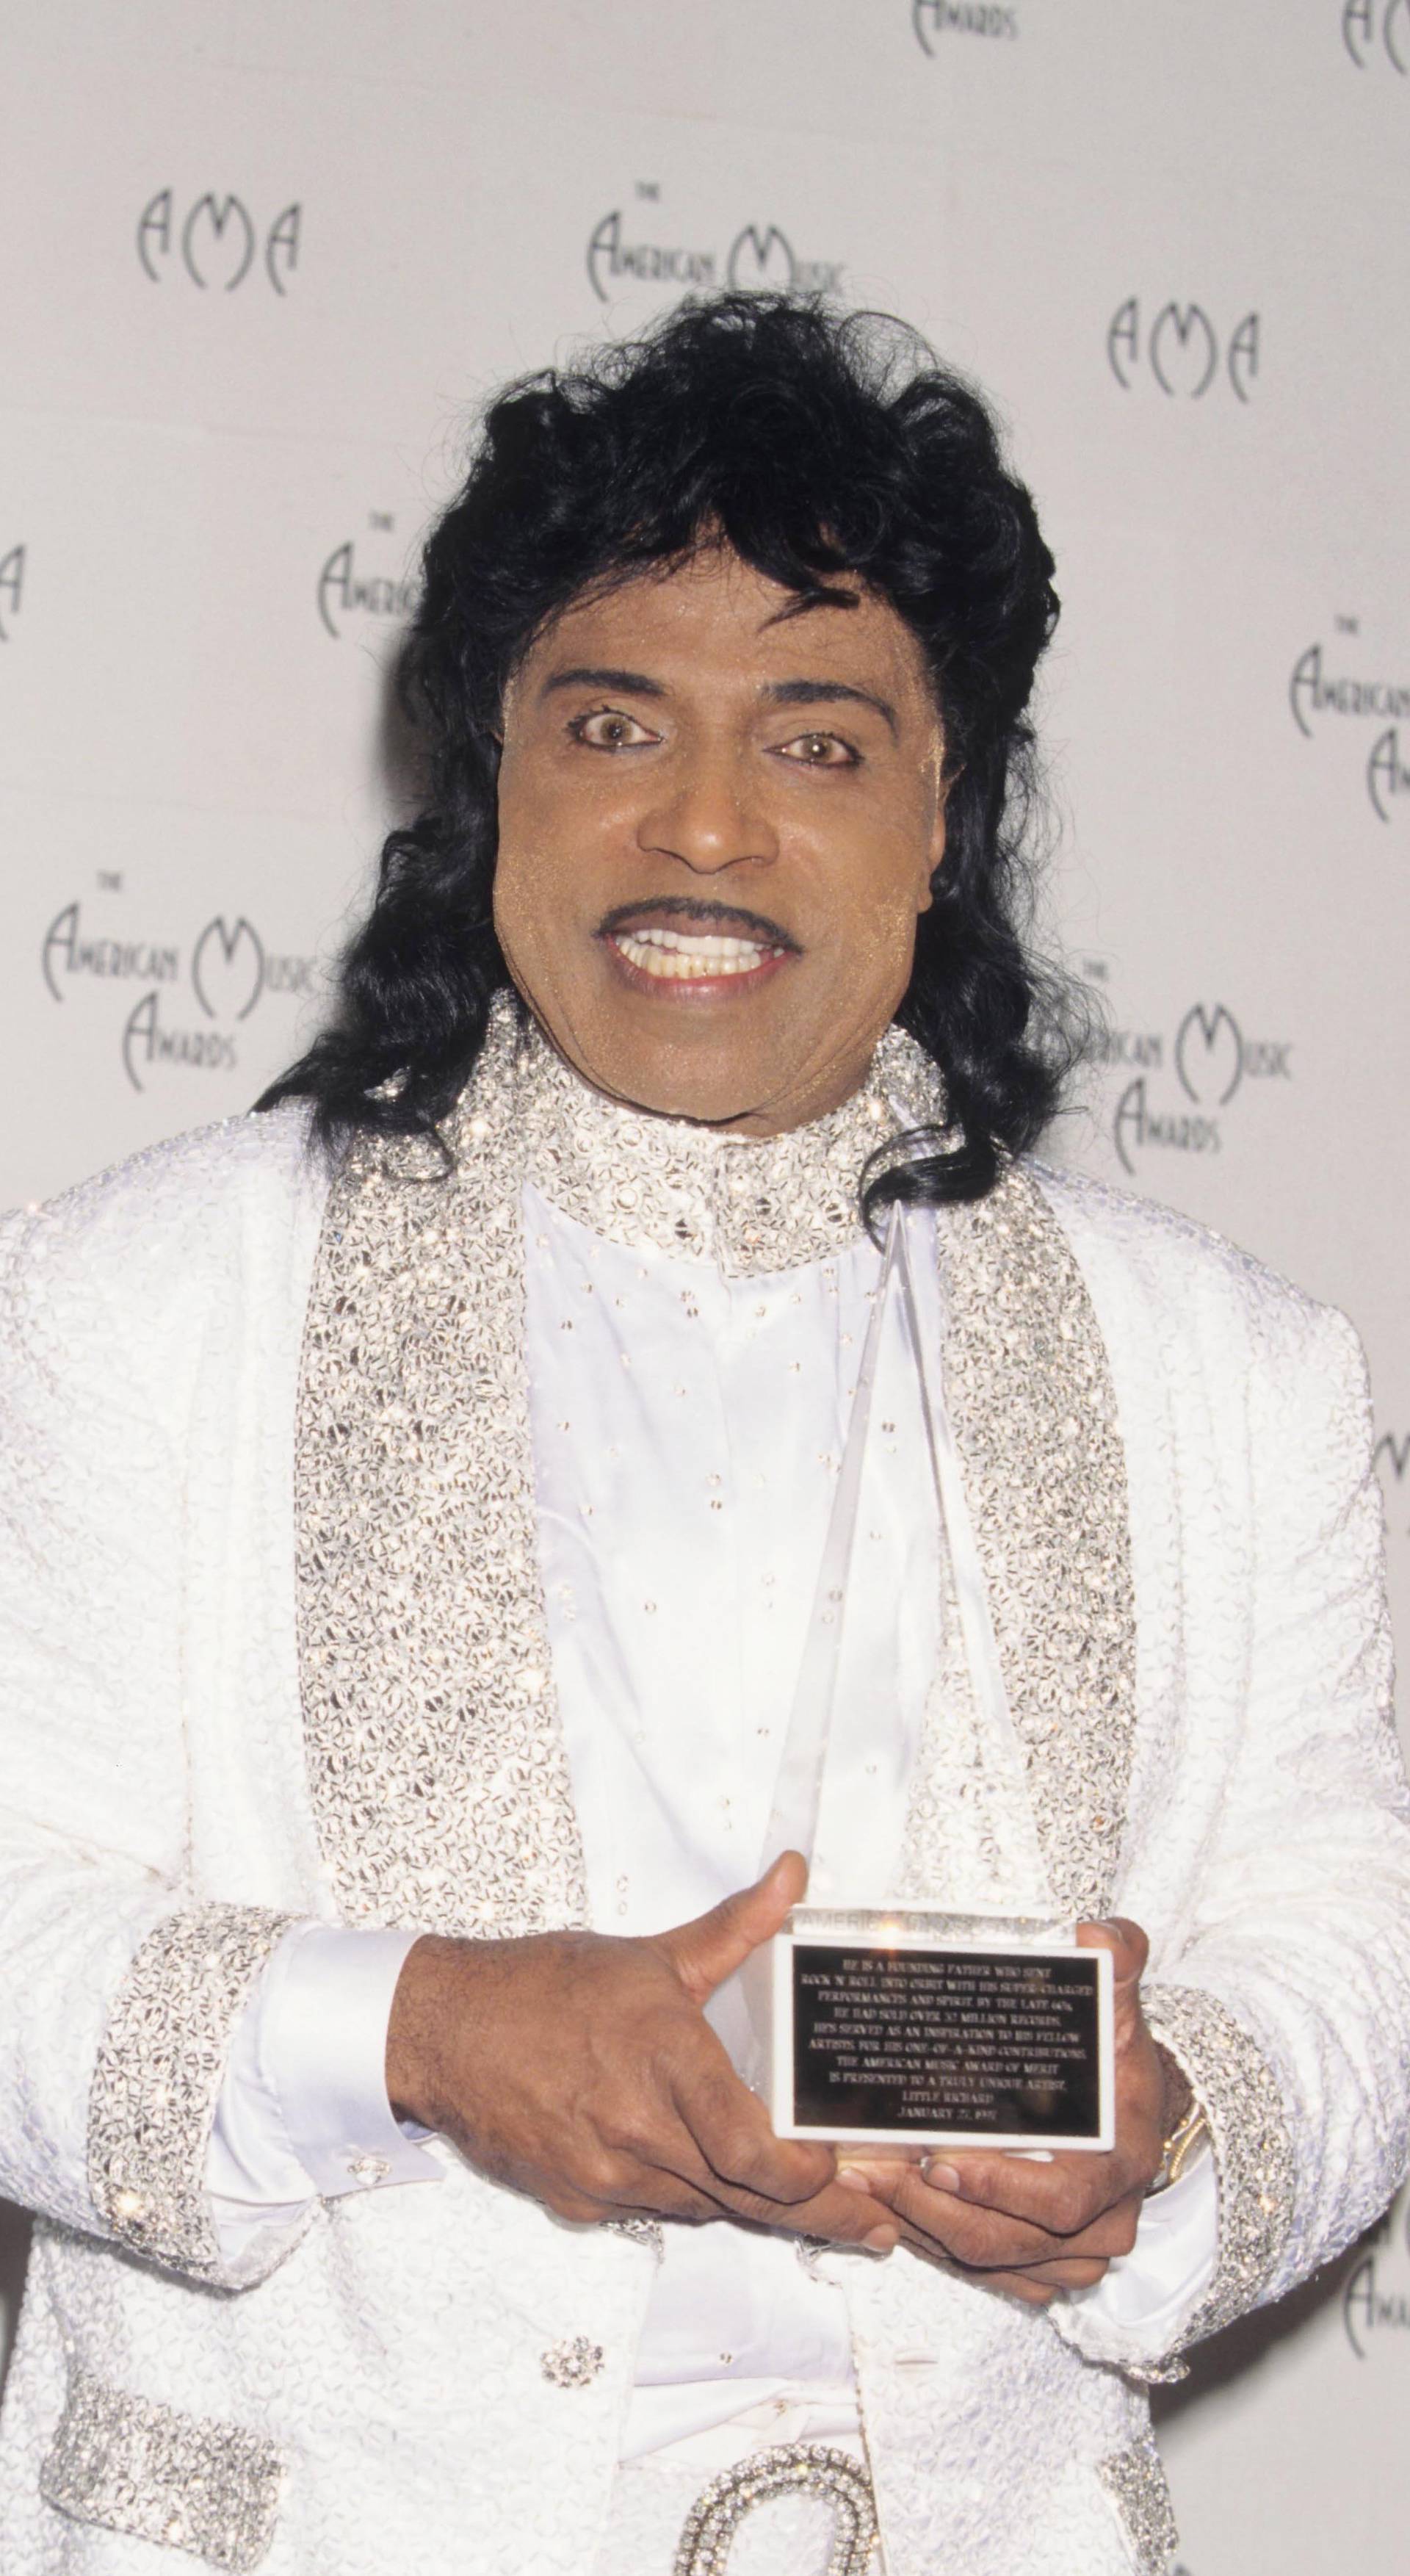 Little Richard 1932-2020 American Rock and Roll Icon